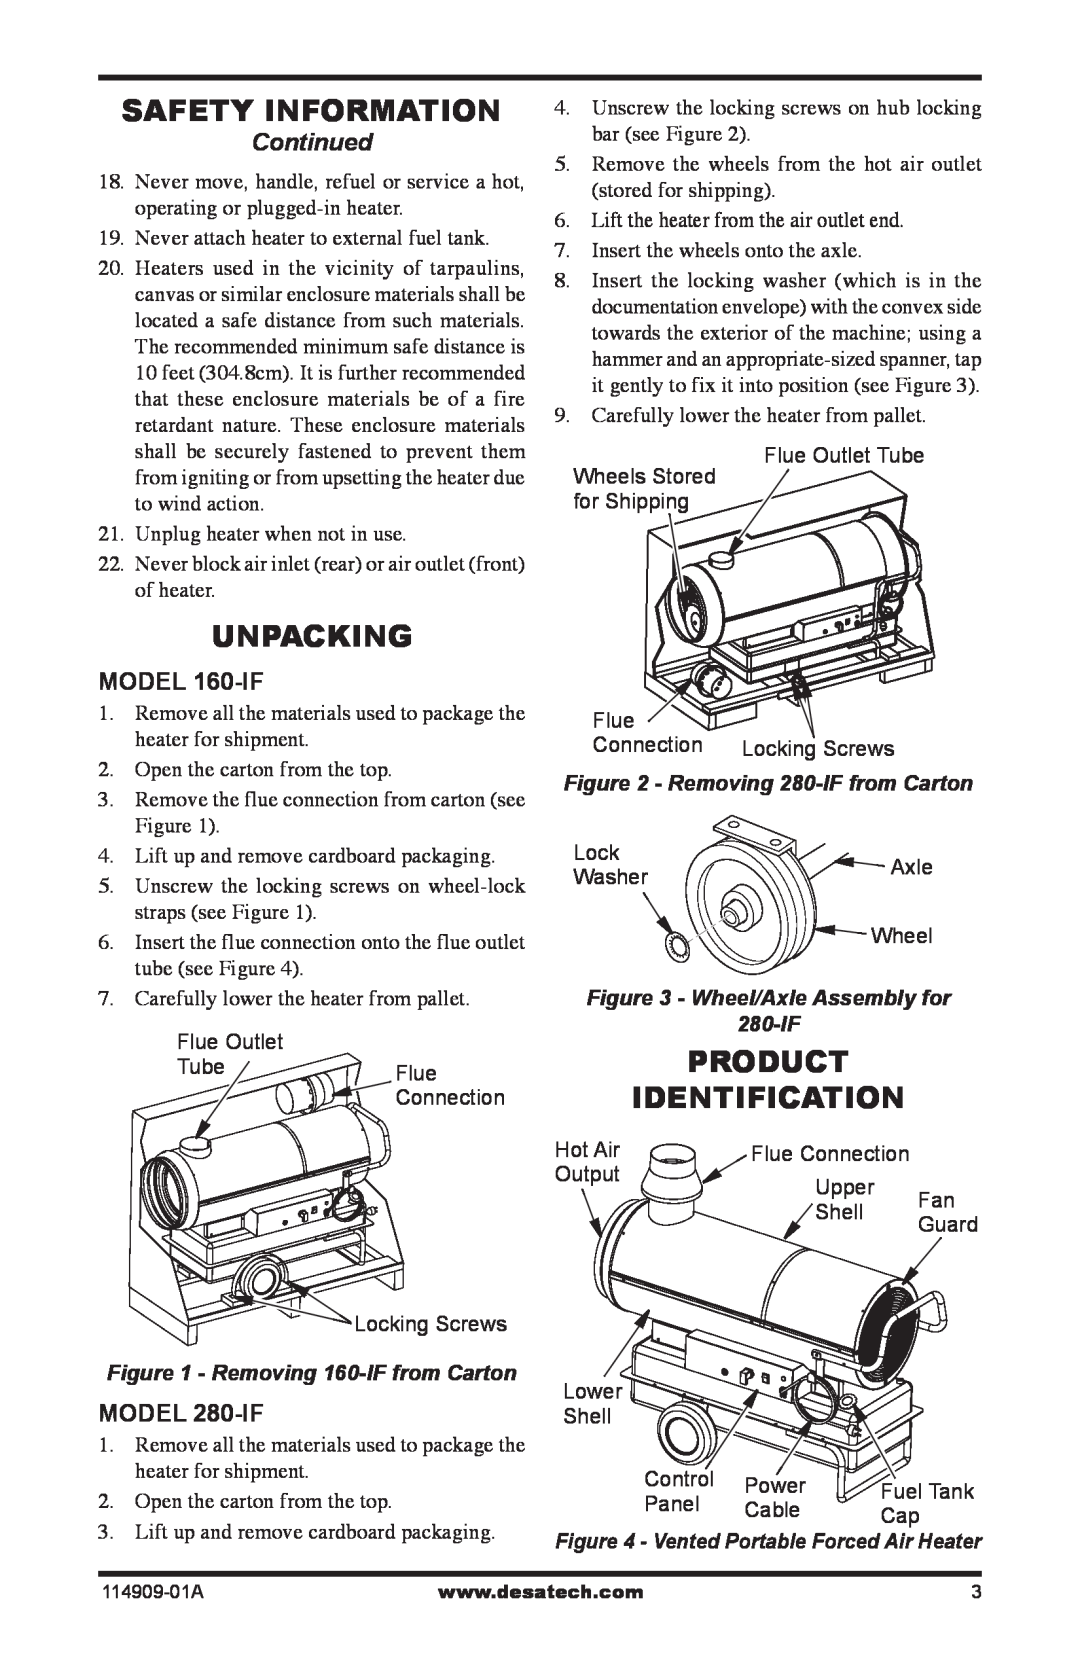 Desa 160-IF, 280-IF owner manual Safety Information, Unpacking, Product, Identification, Continued 